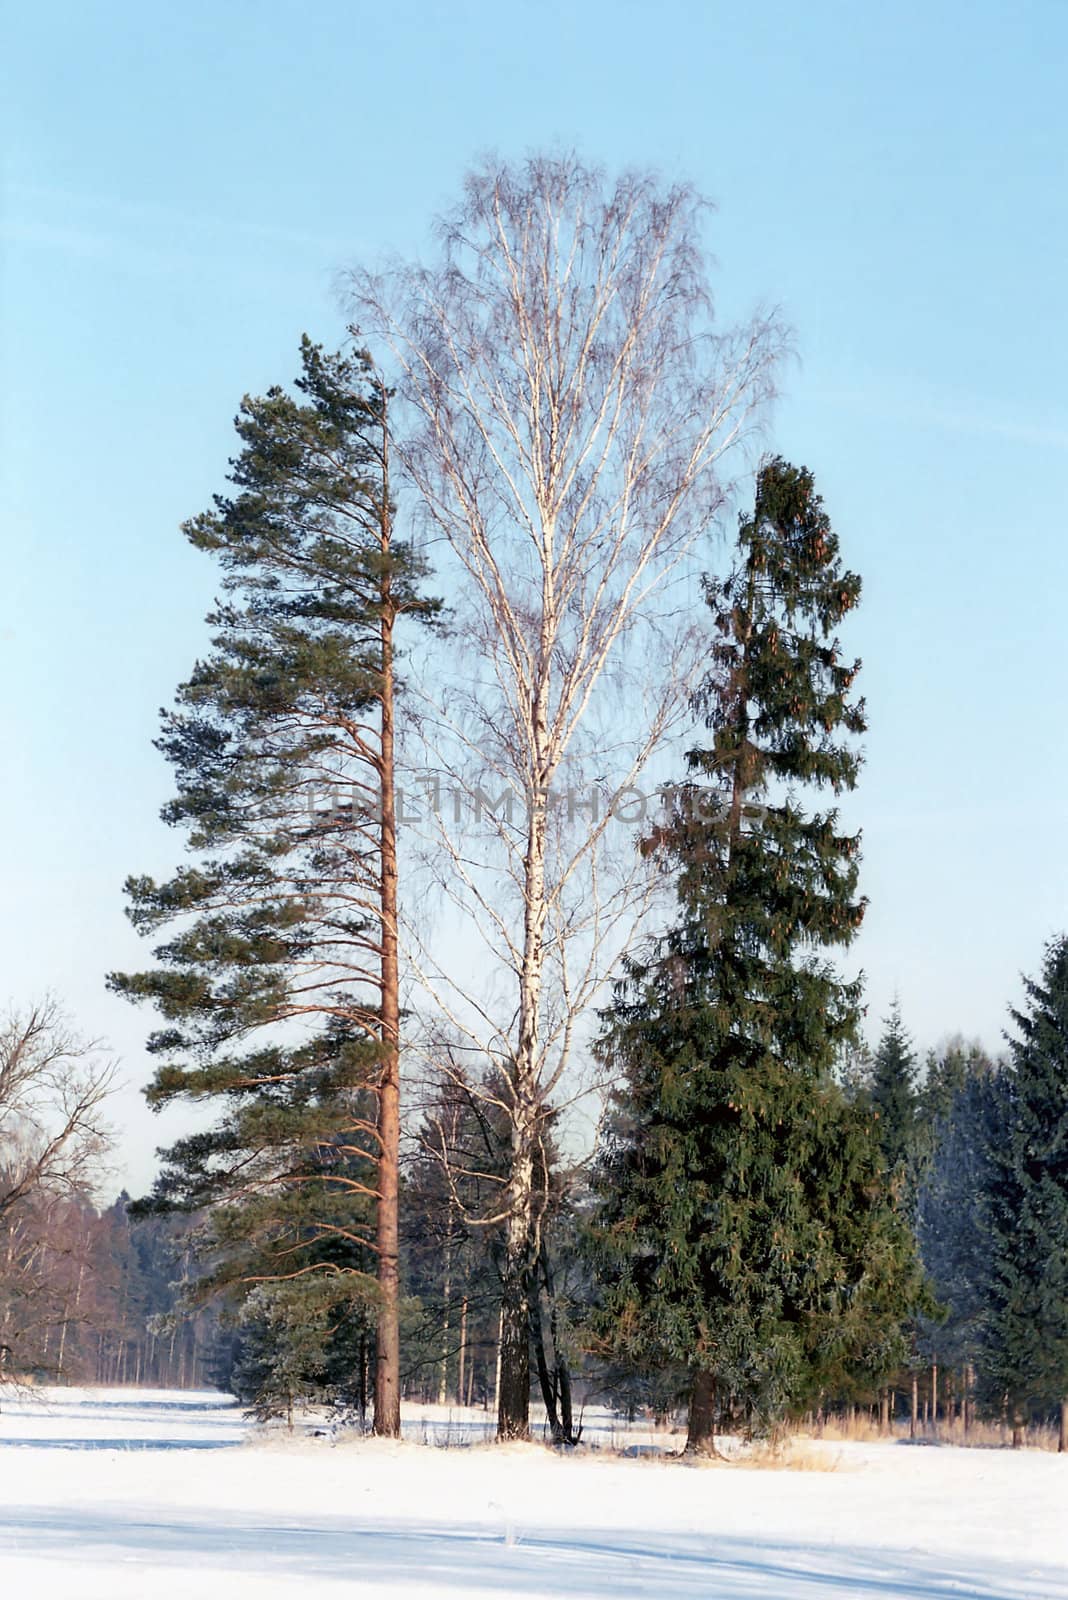 Birch, pine and fir trees next to each other